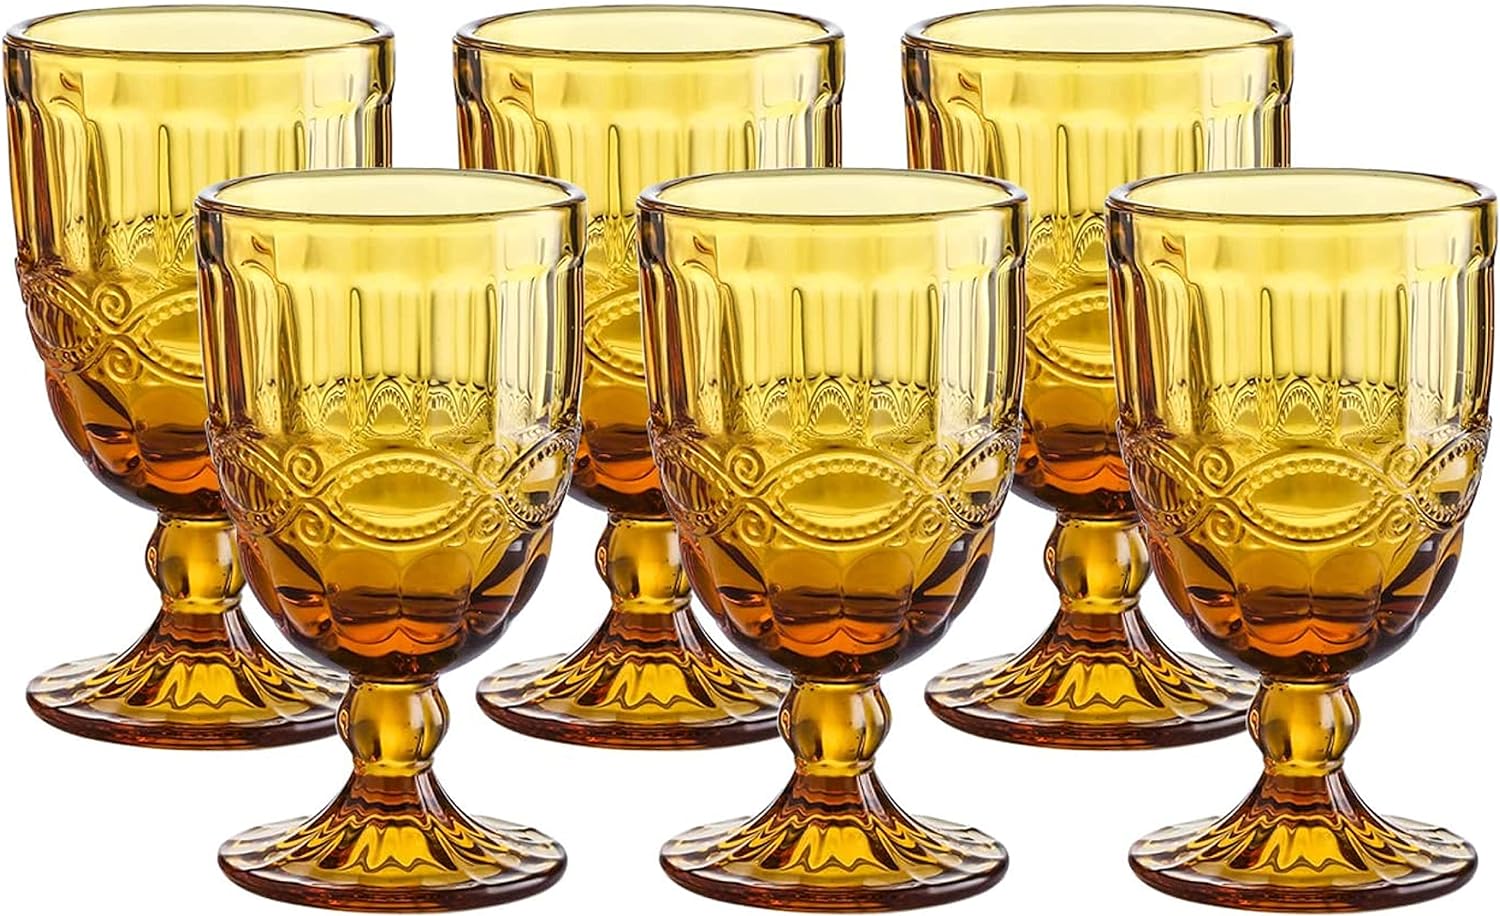 WHOLE HOUSEWARES | Colored Amber Drinking Glasses | Amber Glassware |Pressed Pattern Wine Amber Glass Goblet with Stem for Wedding | Set of 6 | 8.7 Ounce (Amber)